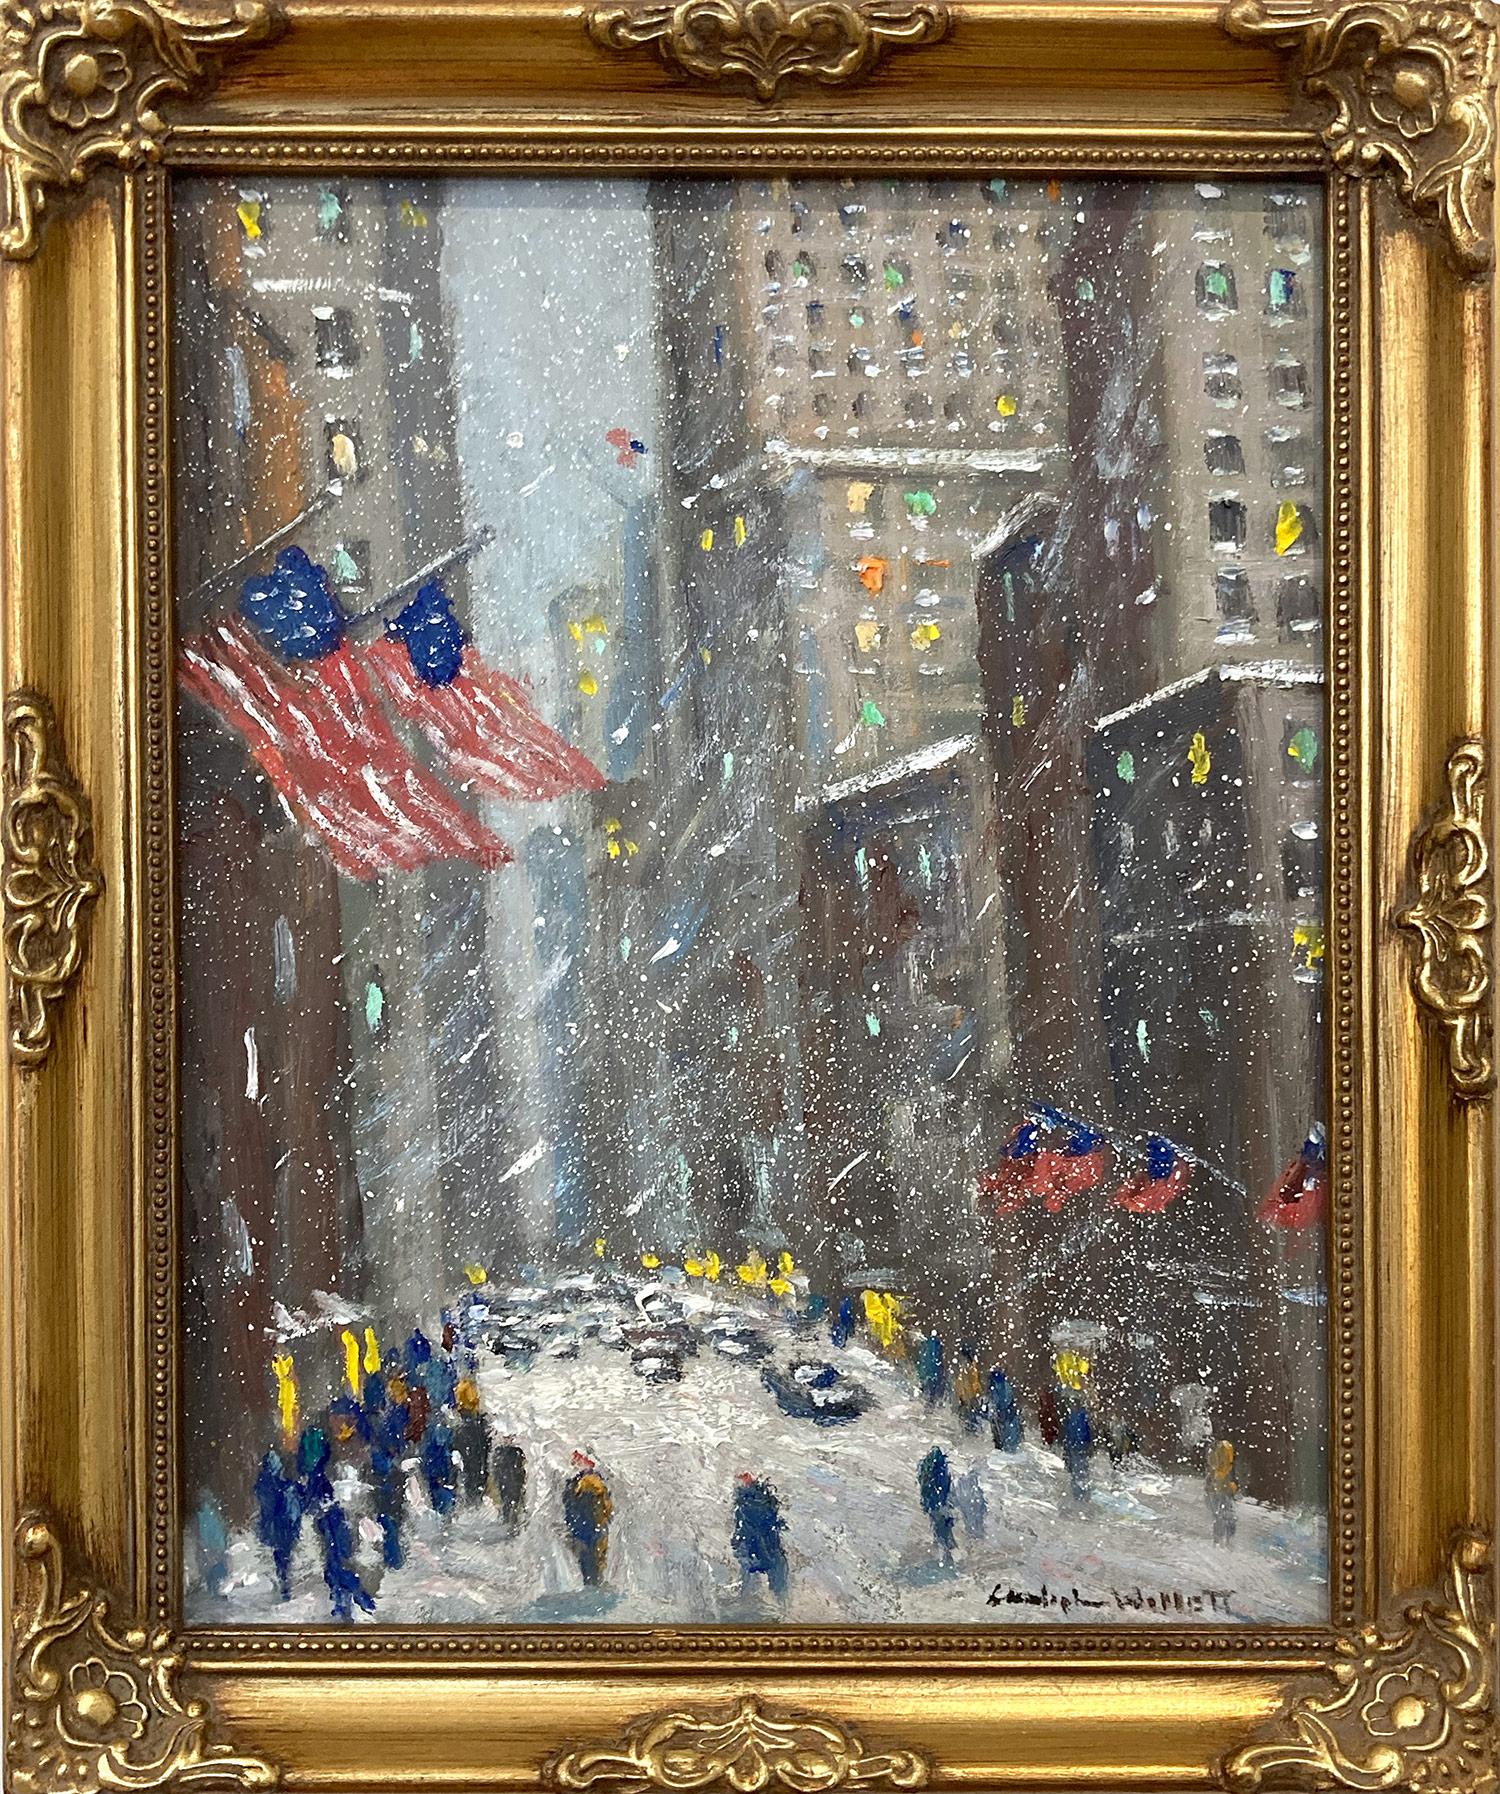 Christopher Willett Figurative Painting - "57th Street New York City" Impressionist Snow Scene in NYC Oil Painting